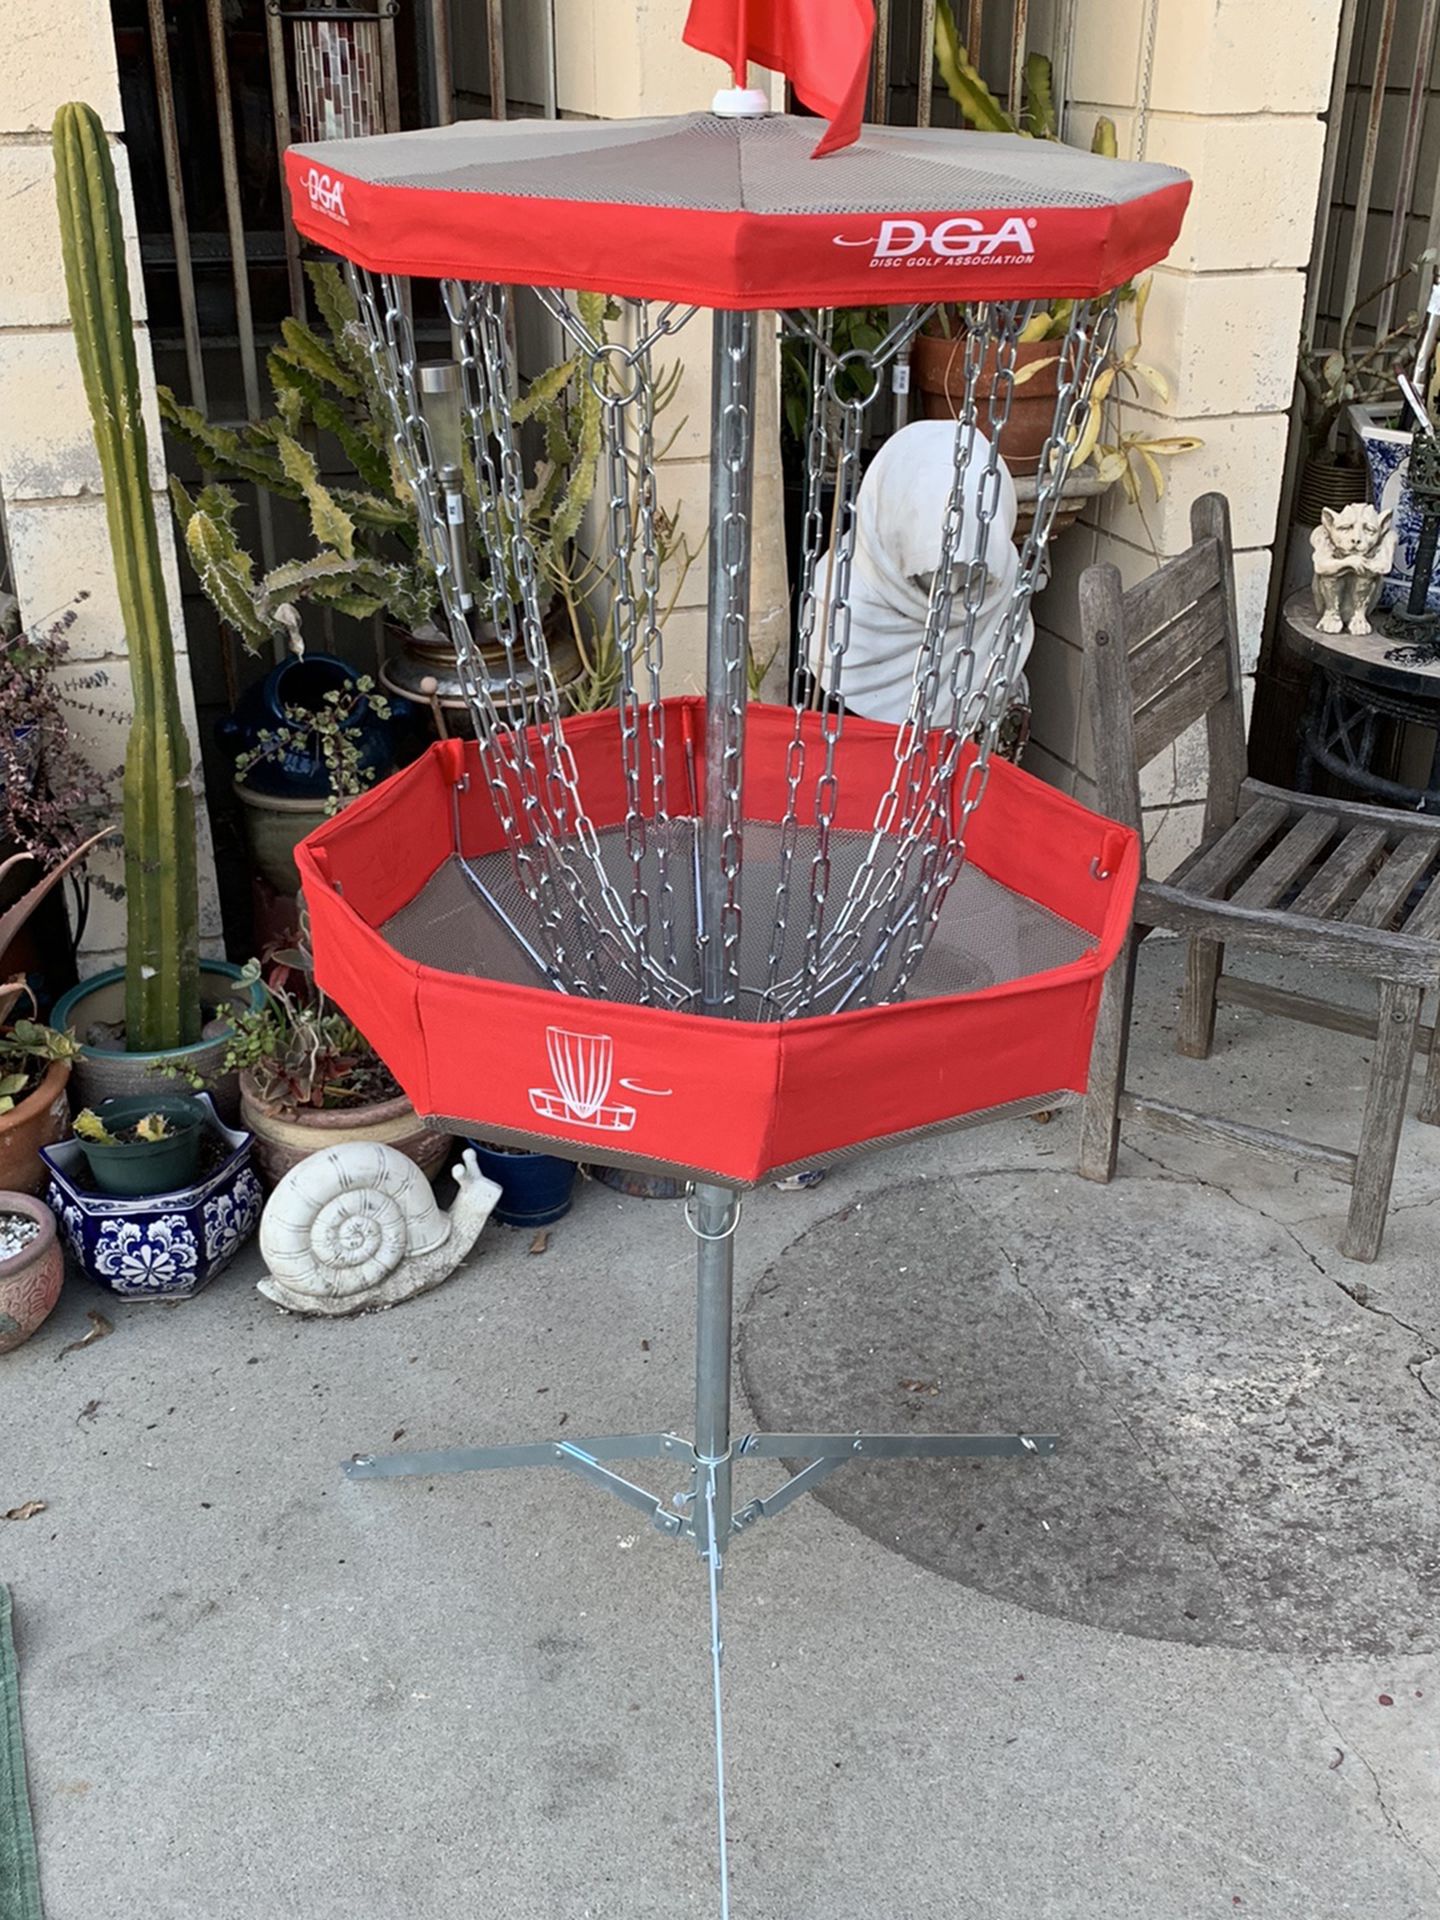 Dga Portable Disc Golf Basket Hard To Find Red Version! (sturdy)